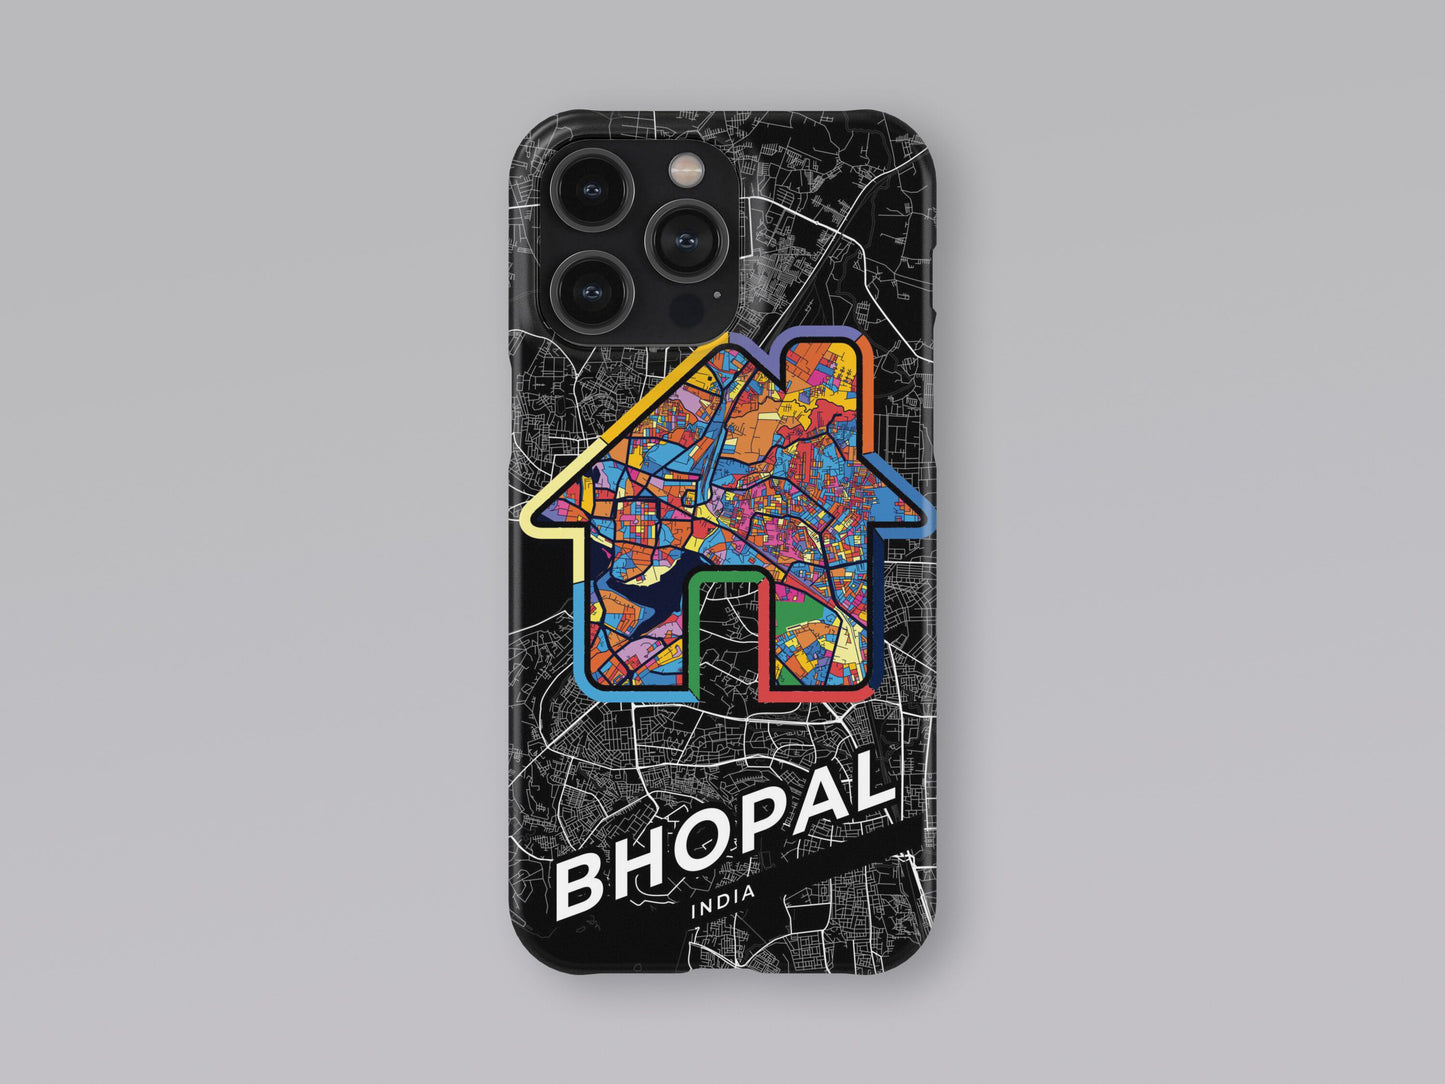 Bhopal India slim phone case with colorful icon. Birthday, wedding or housewarming gift. Couple match cases. 3